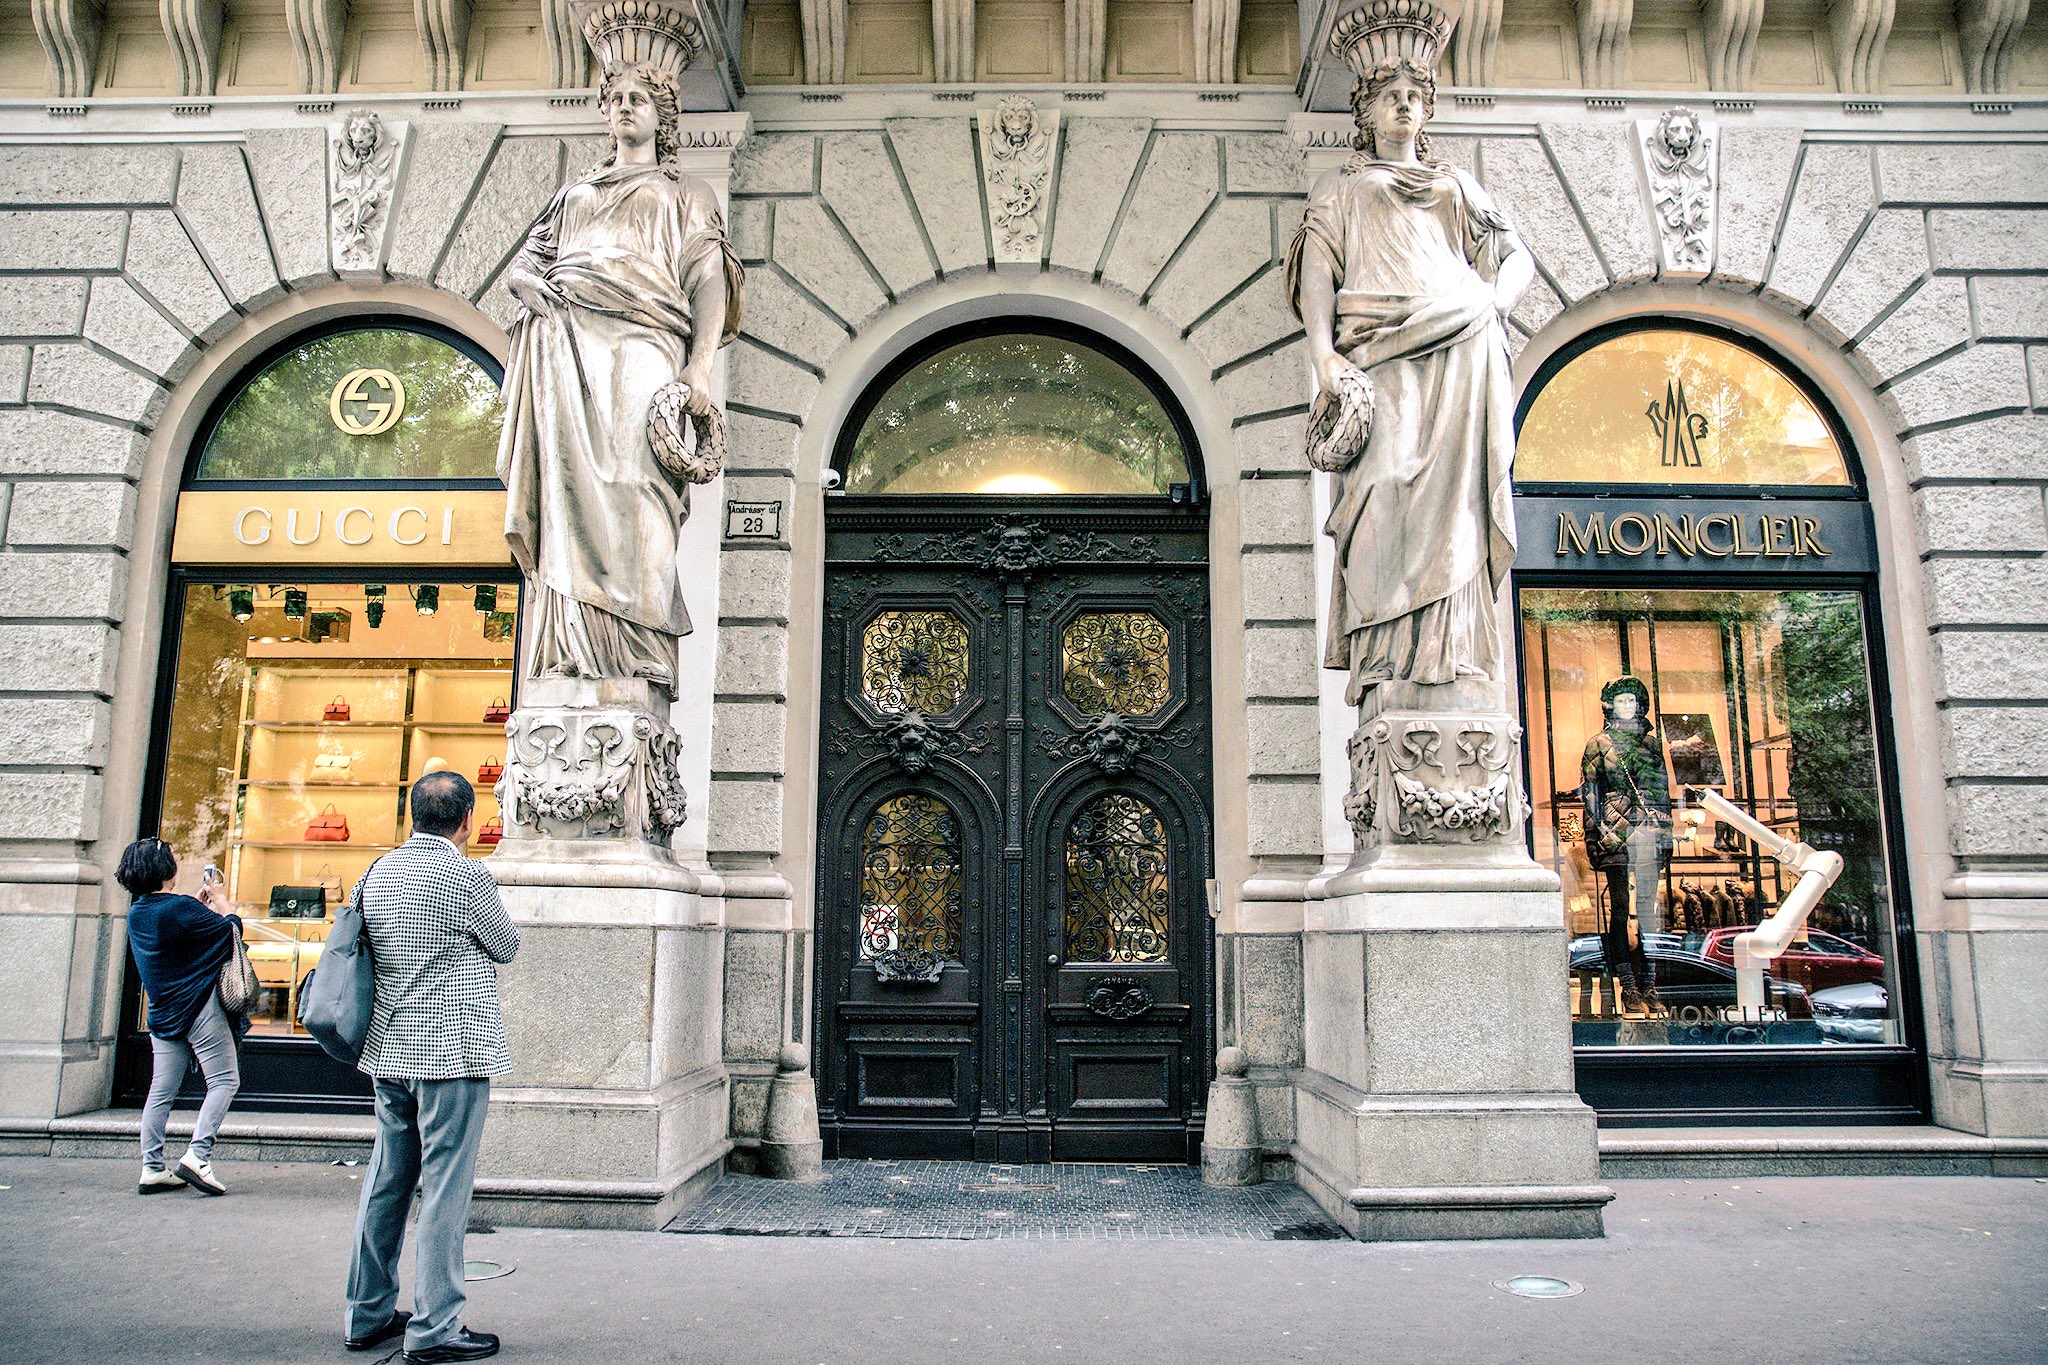 on Twitter: "In 2008 I brought to #Andrassyut in # Budapest followed by #Moncler in #luxuryretail #retailbroker #primelocation marccriebe https://t.co/au5jNtJszT" / Twitter